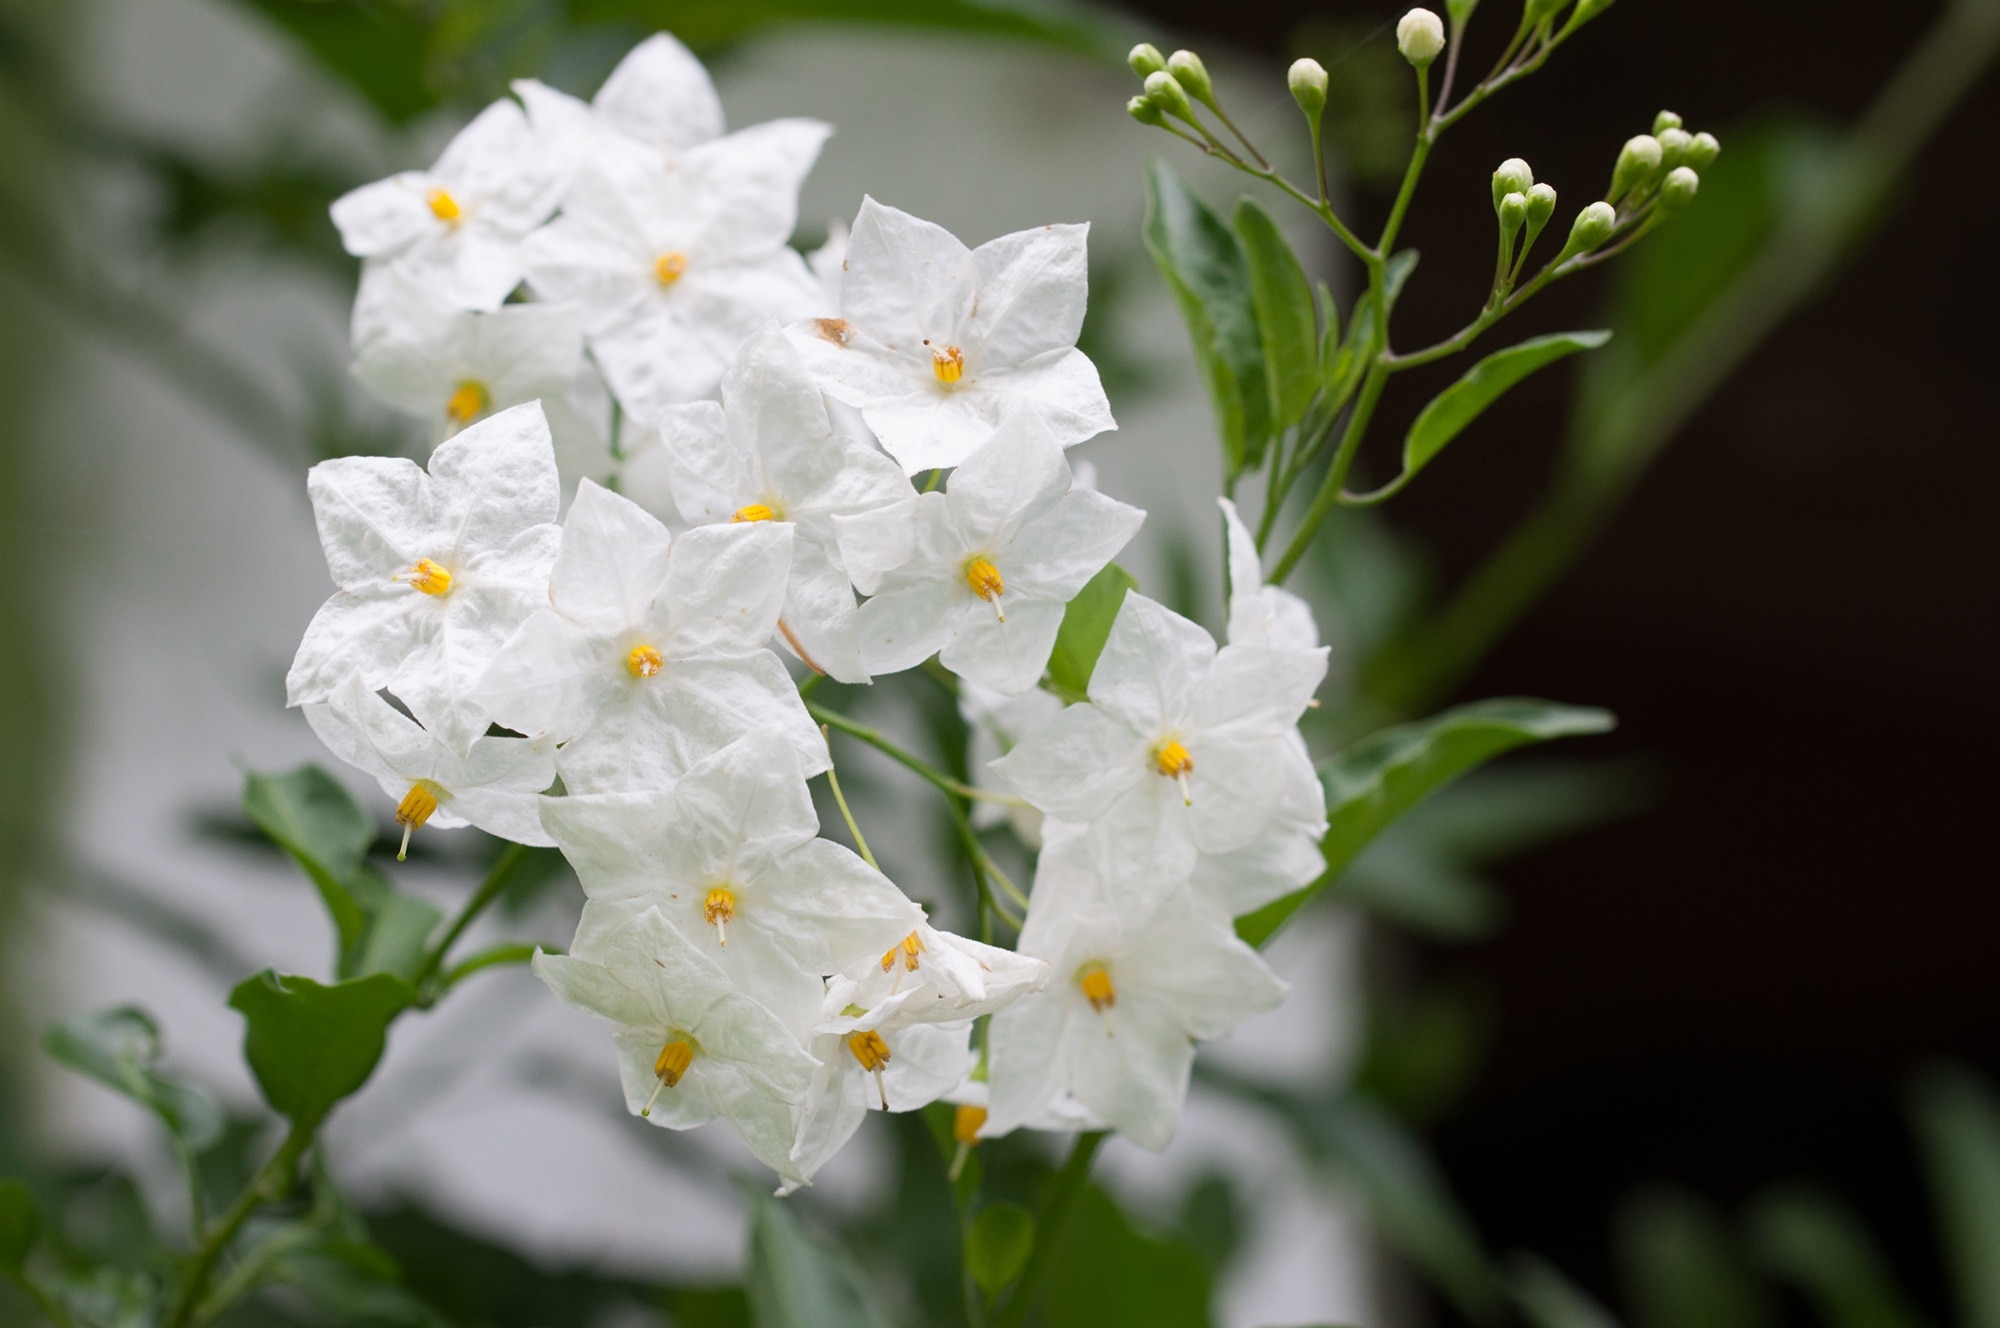 white 5 petaled flowers in closeup photo